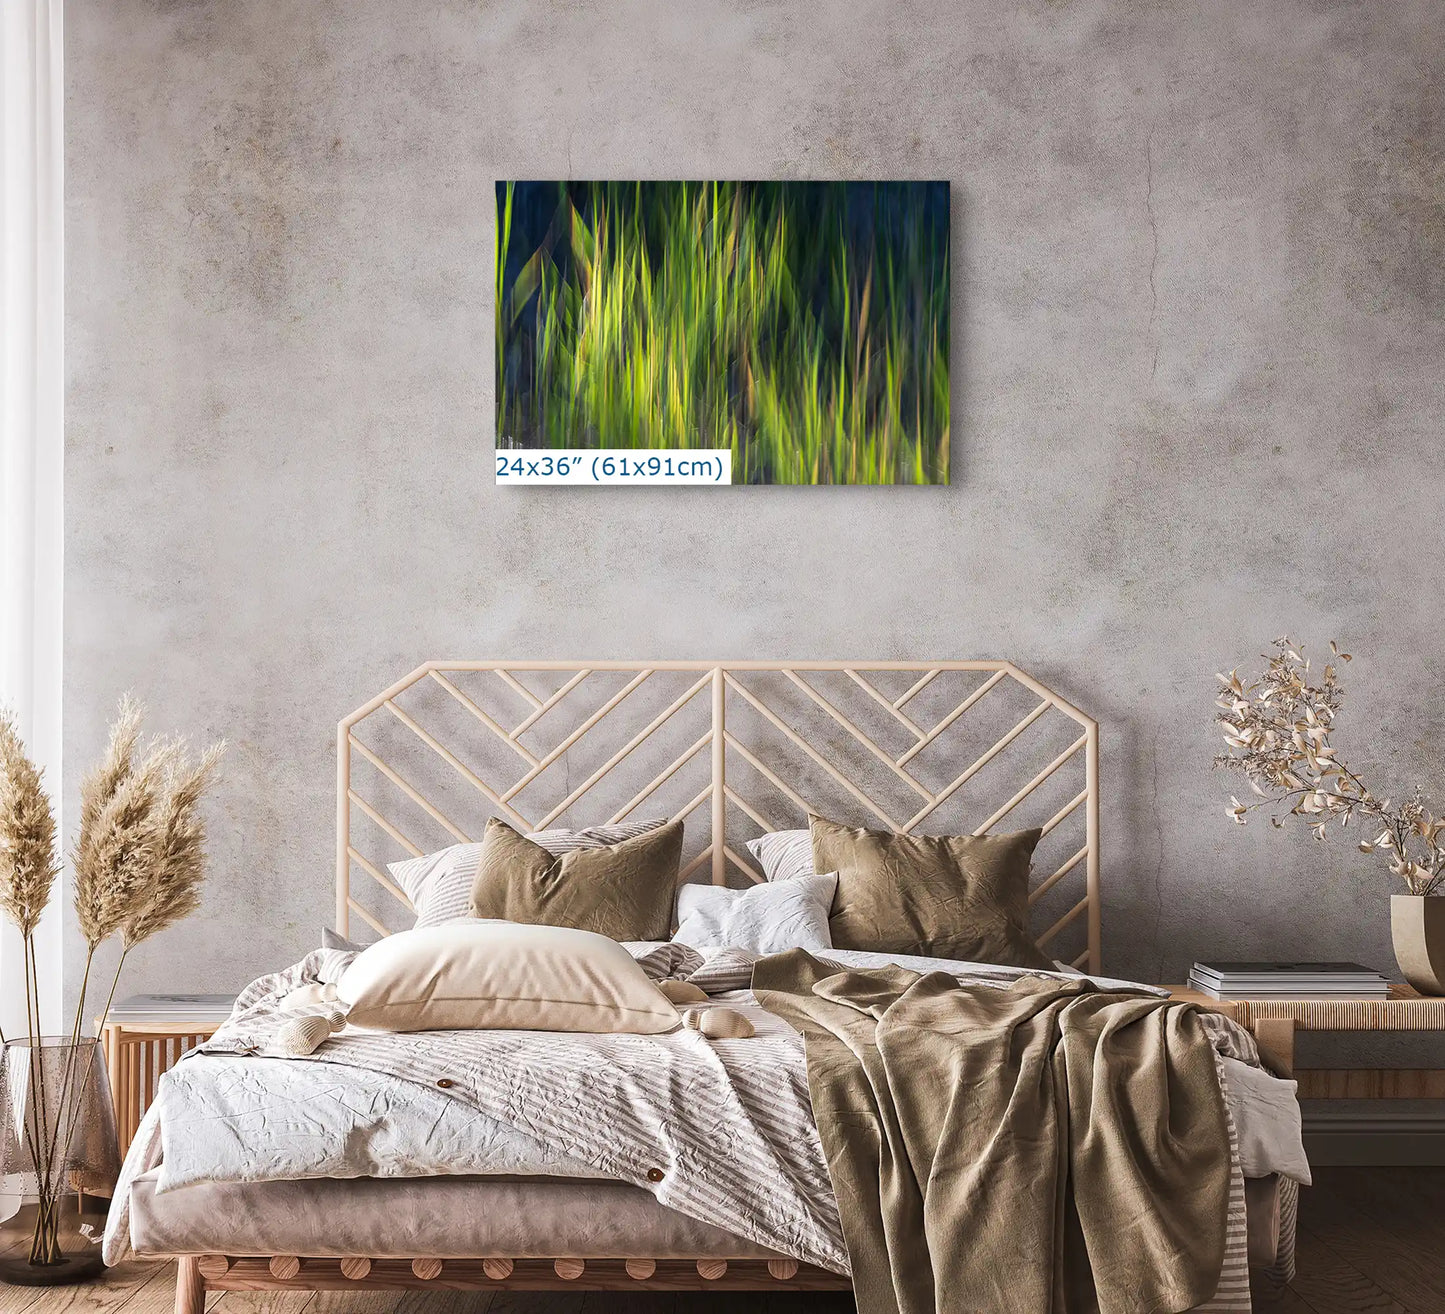 A 24"x36" abstract canvas print, with green and yellow tones reminiscent of waving grass, brings a calming yet vibrant element to the tranquil bedroom decor.